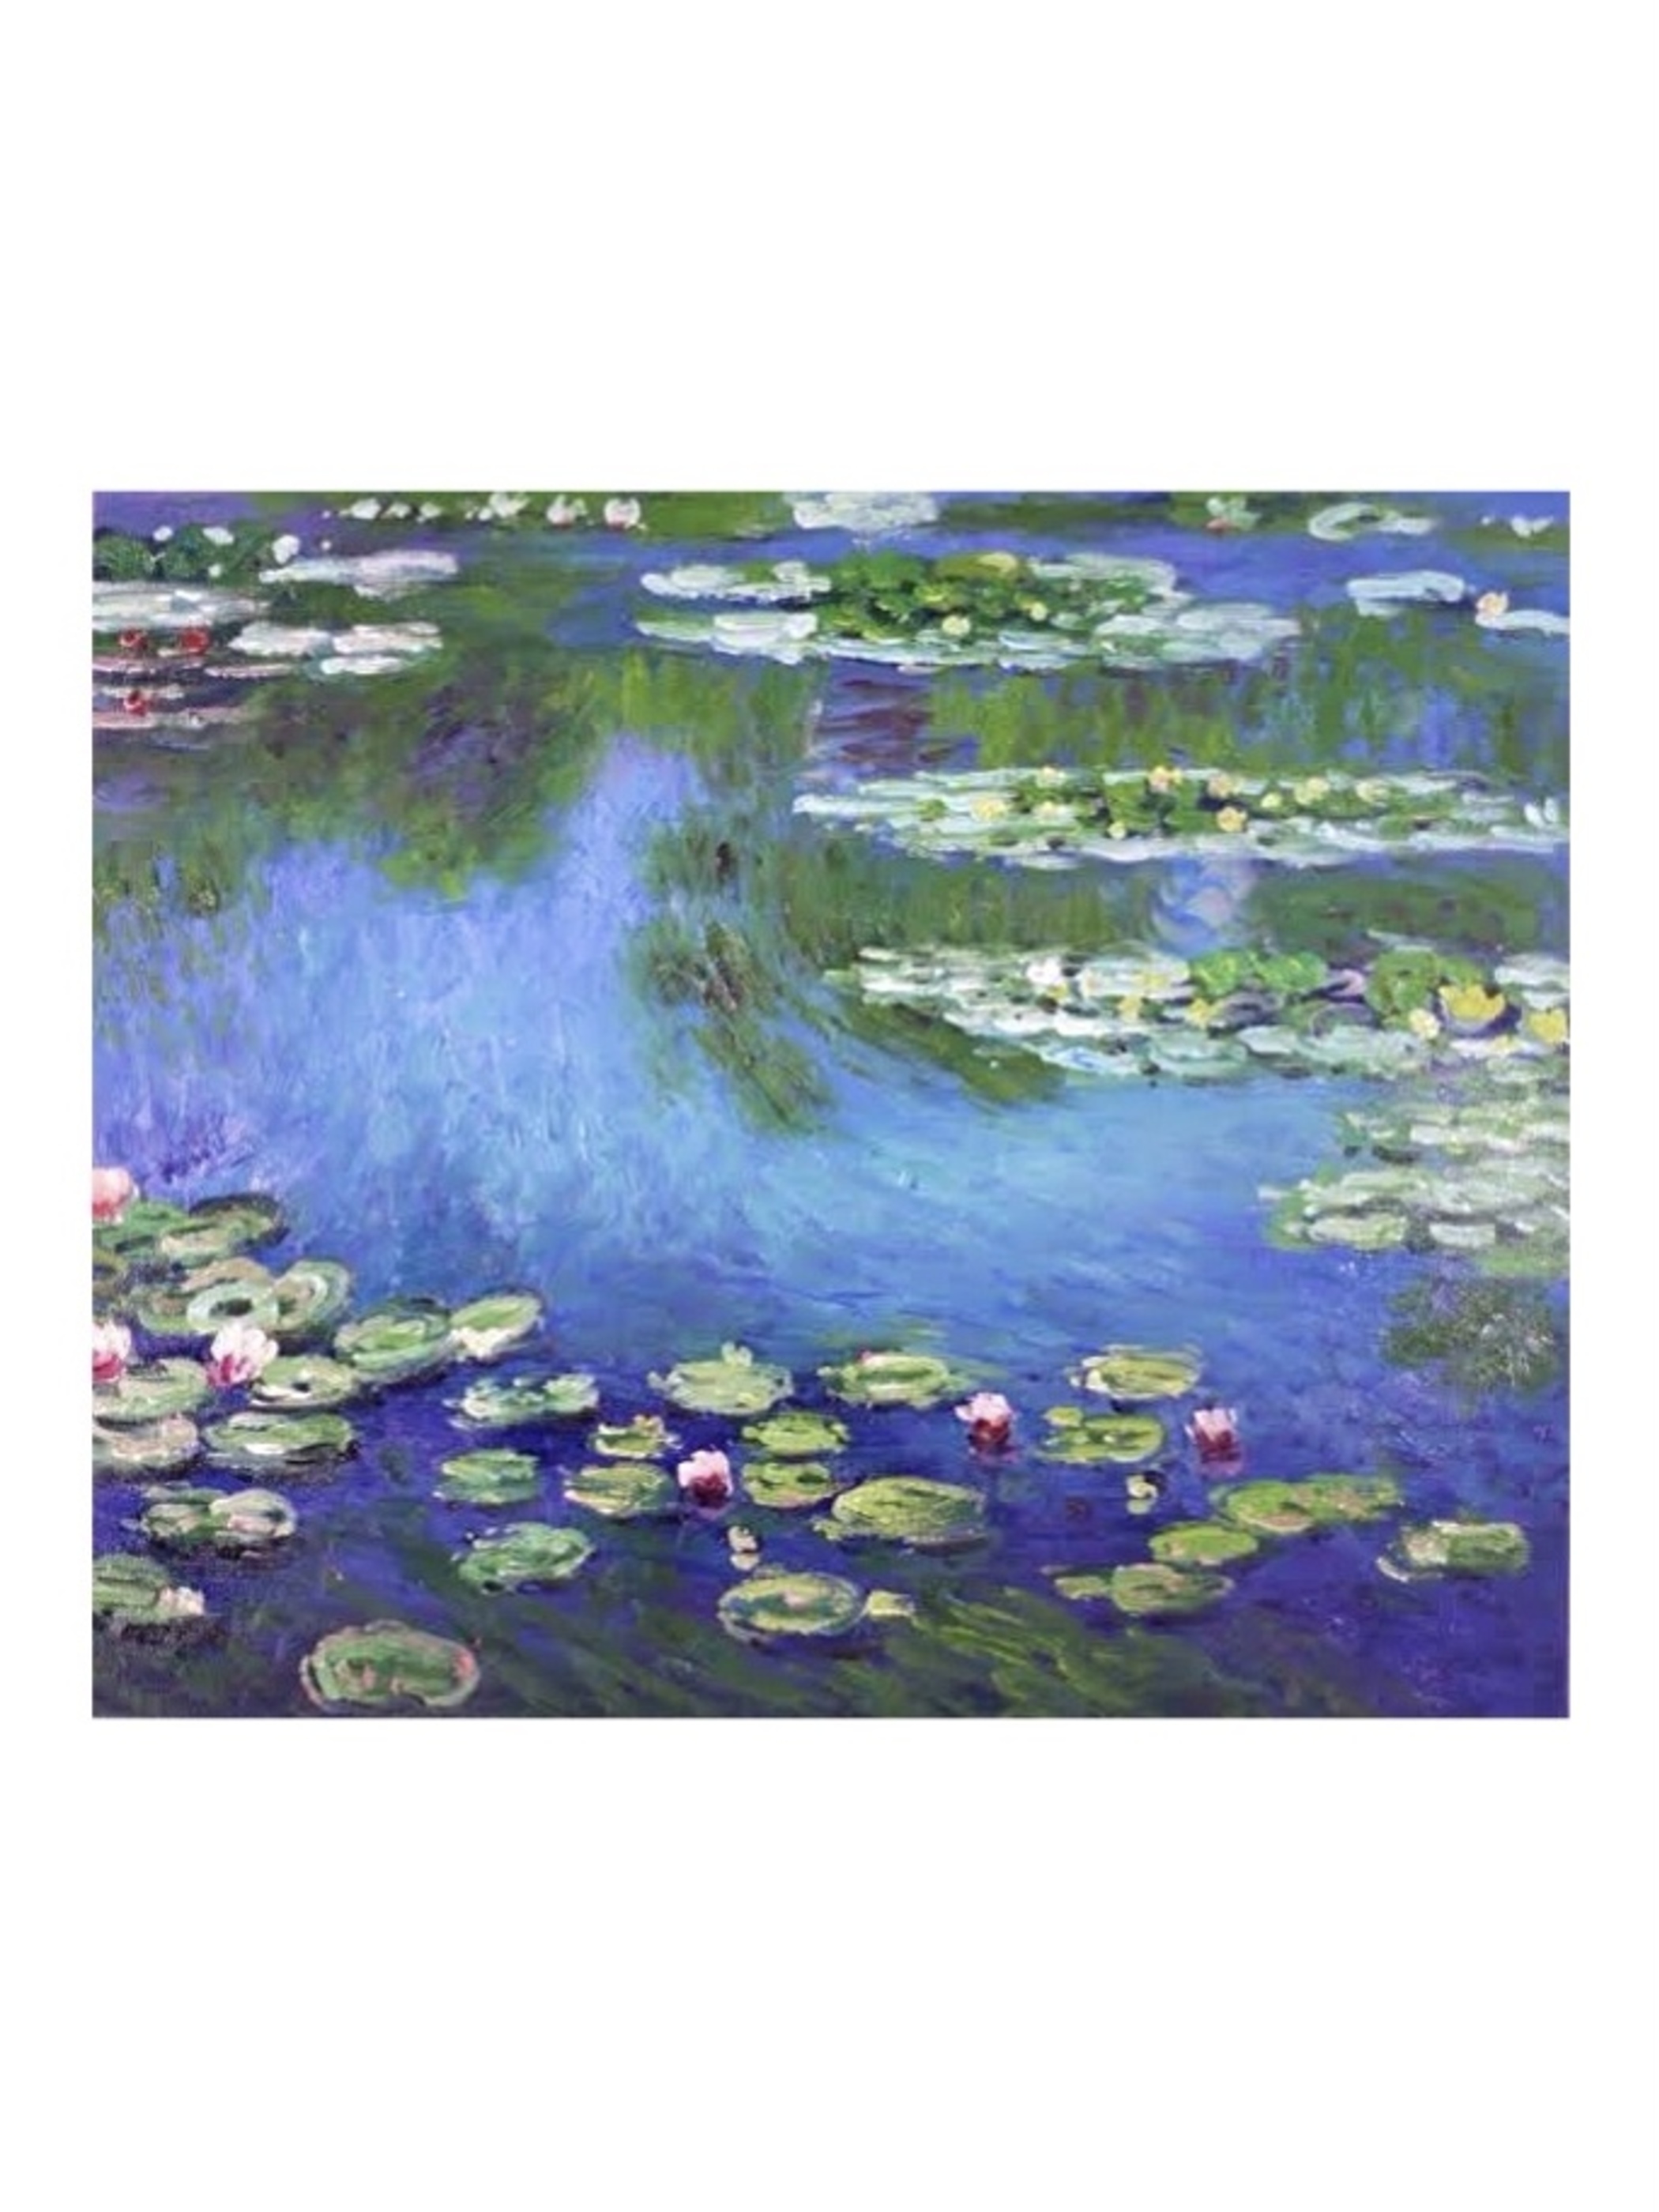 WATER LILY(claude monet)